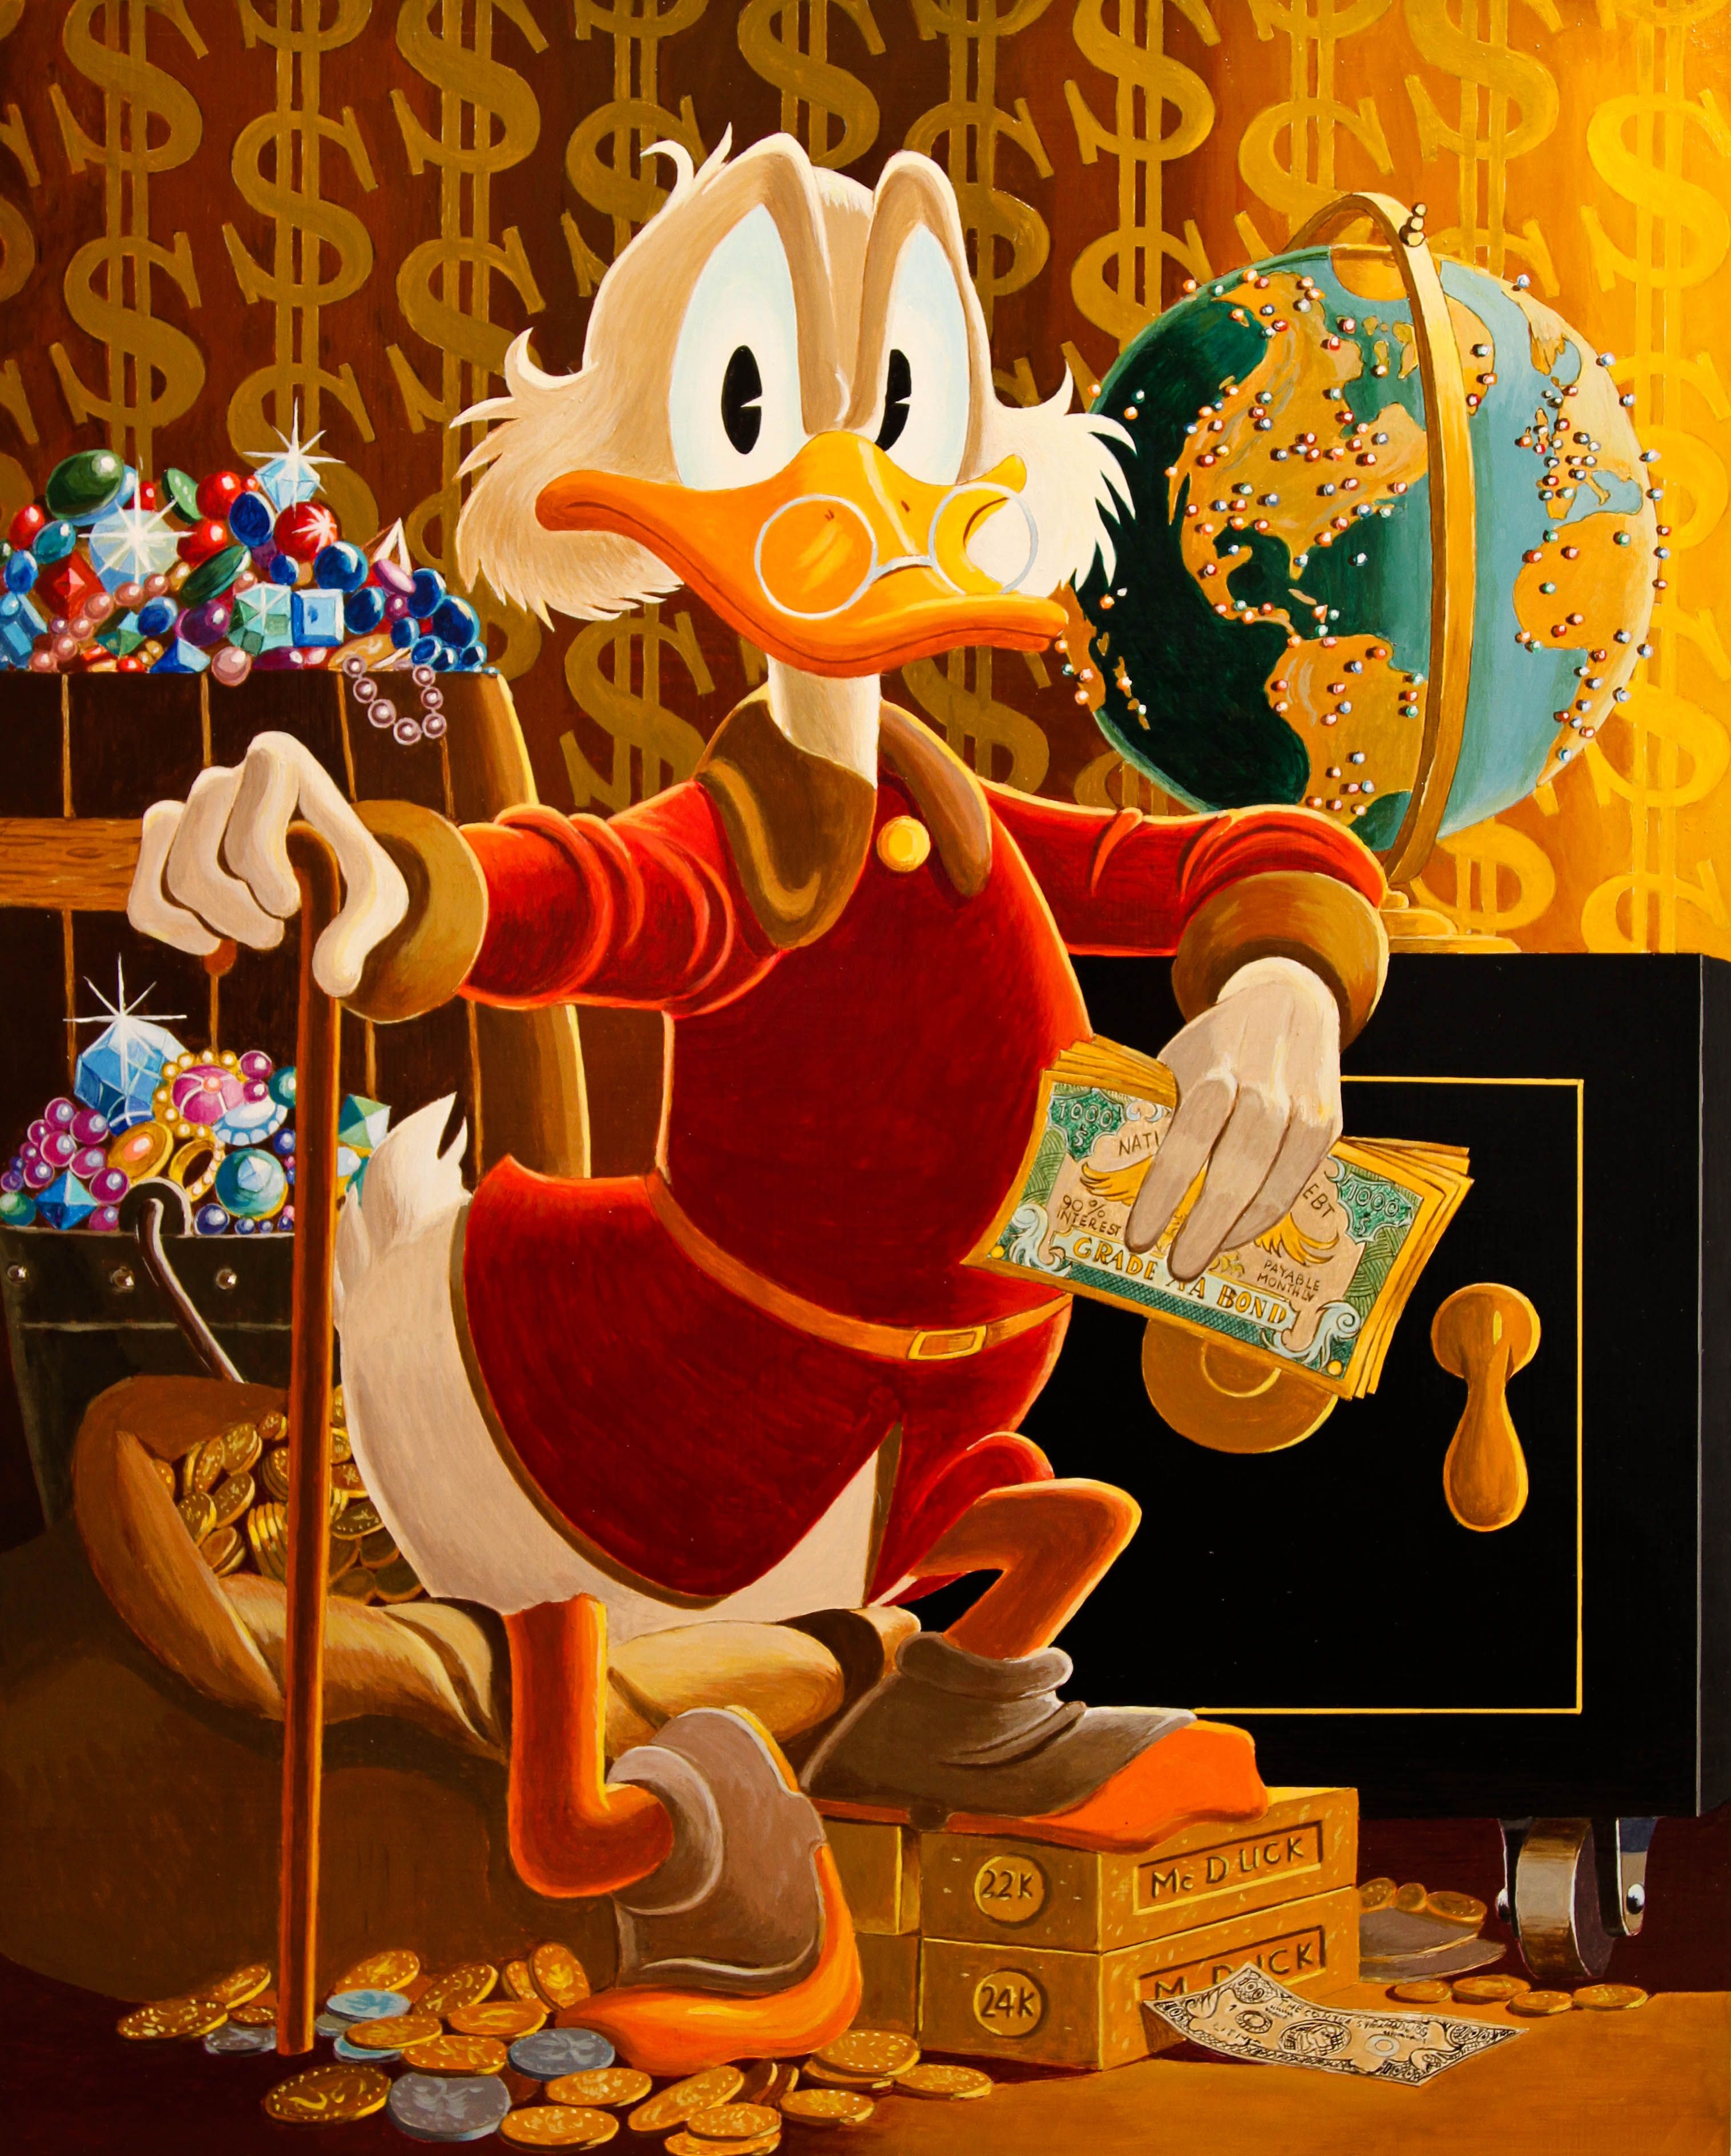 Scrooge McDuck Background. Uncle